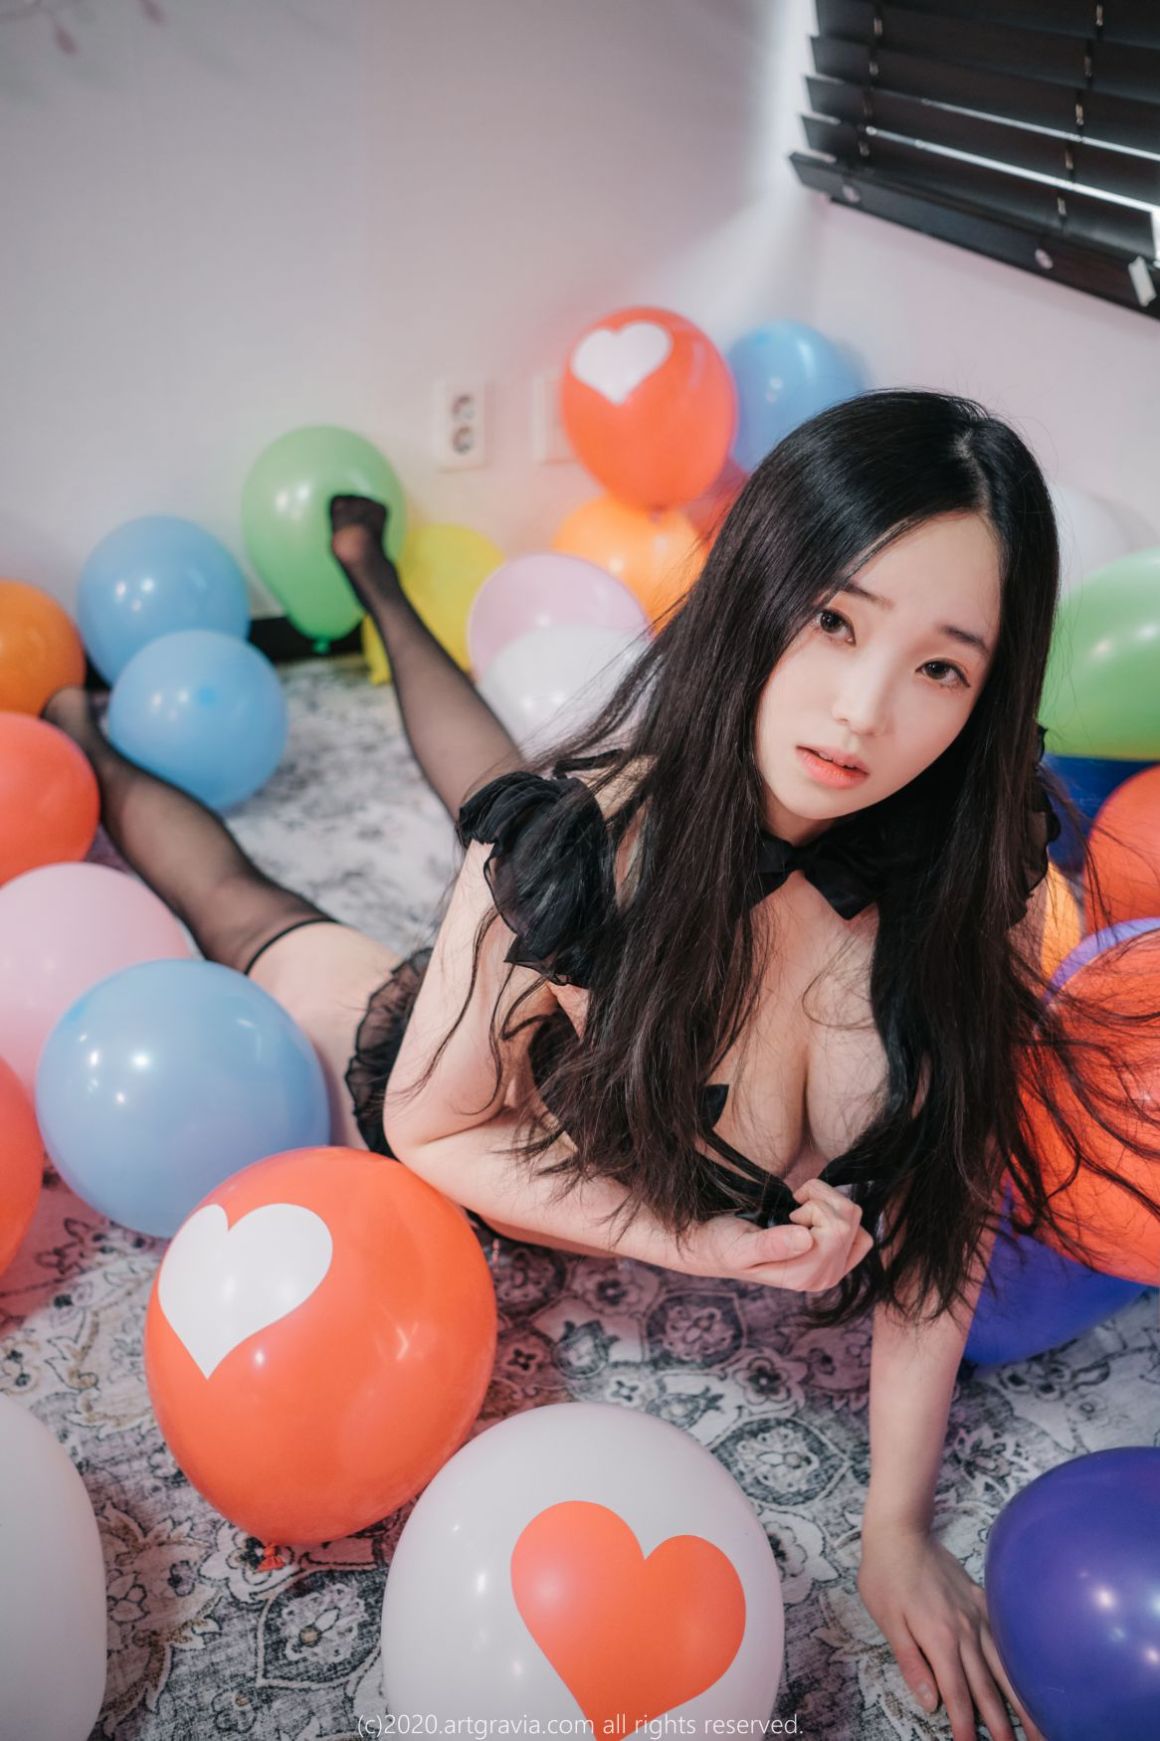 AsianOnlyfans.com 04 213 20211010